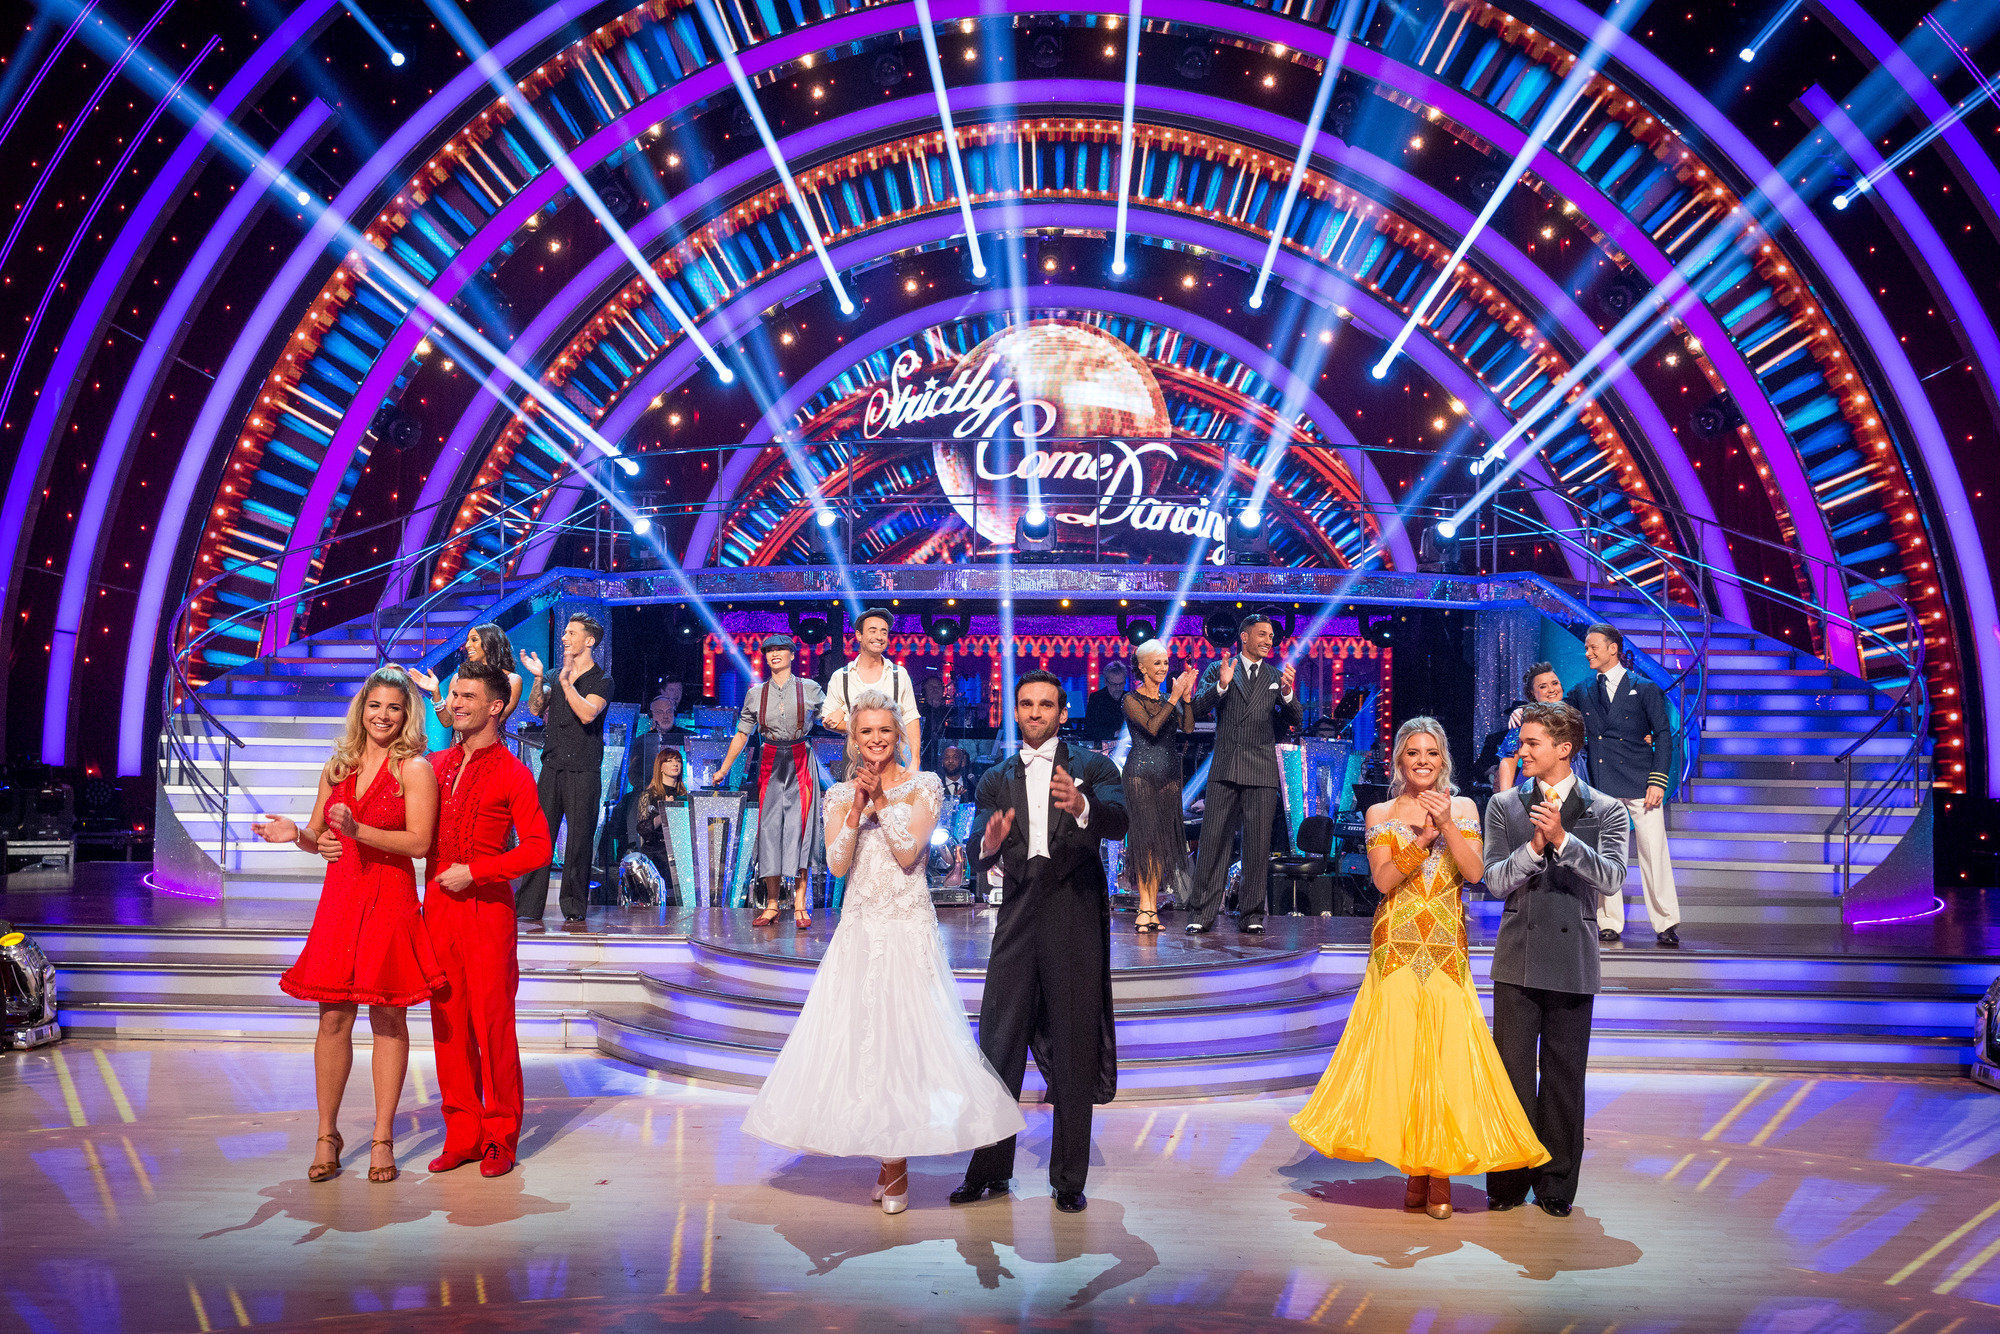 <strong>'Strictly Come Dancing' is going to the musicals this week</strong>